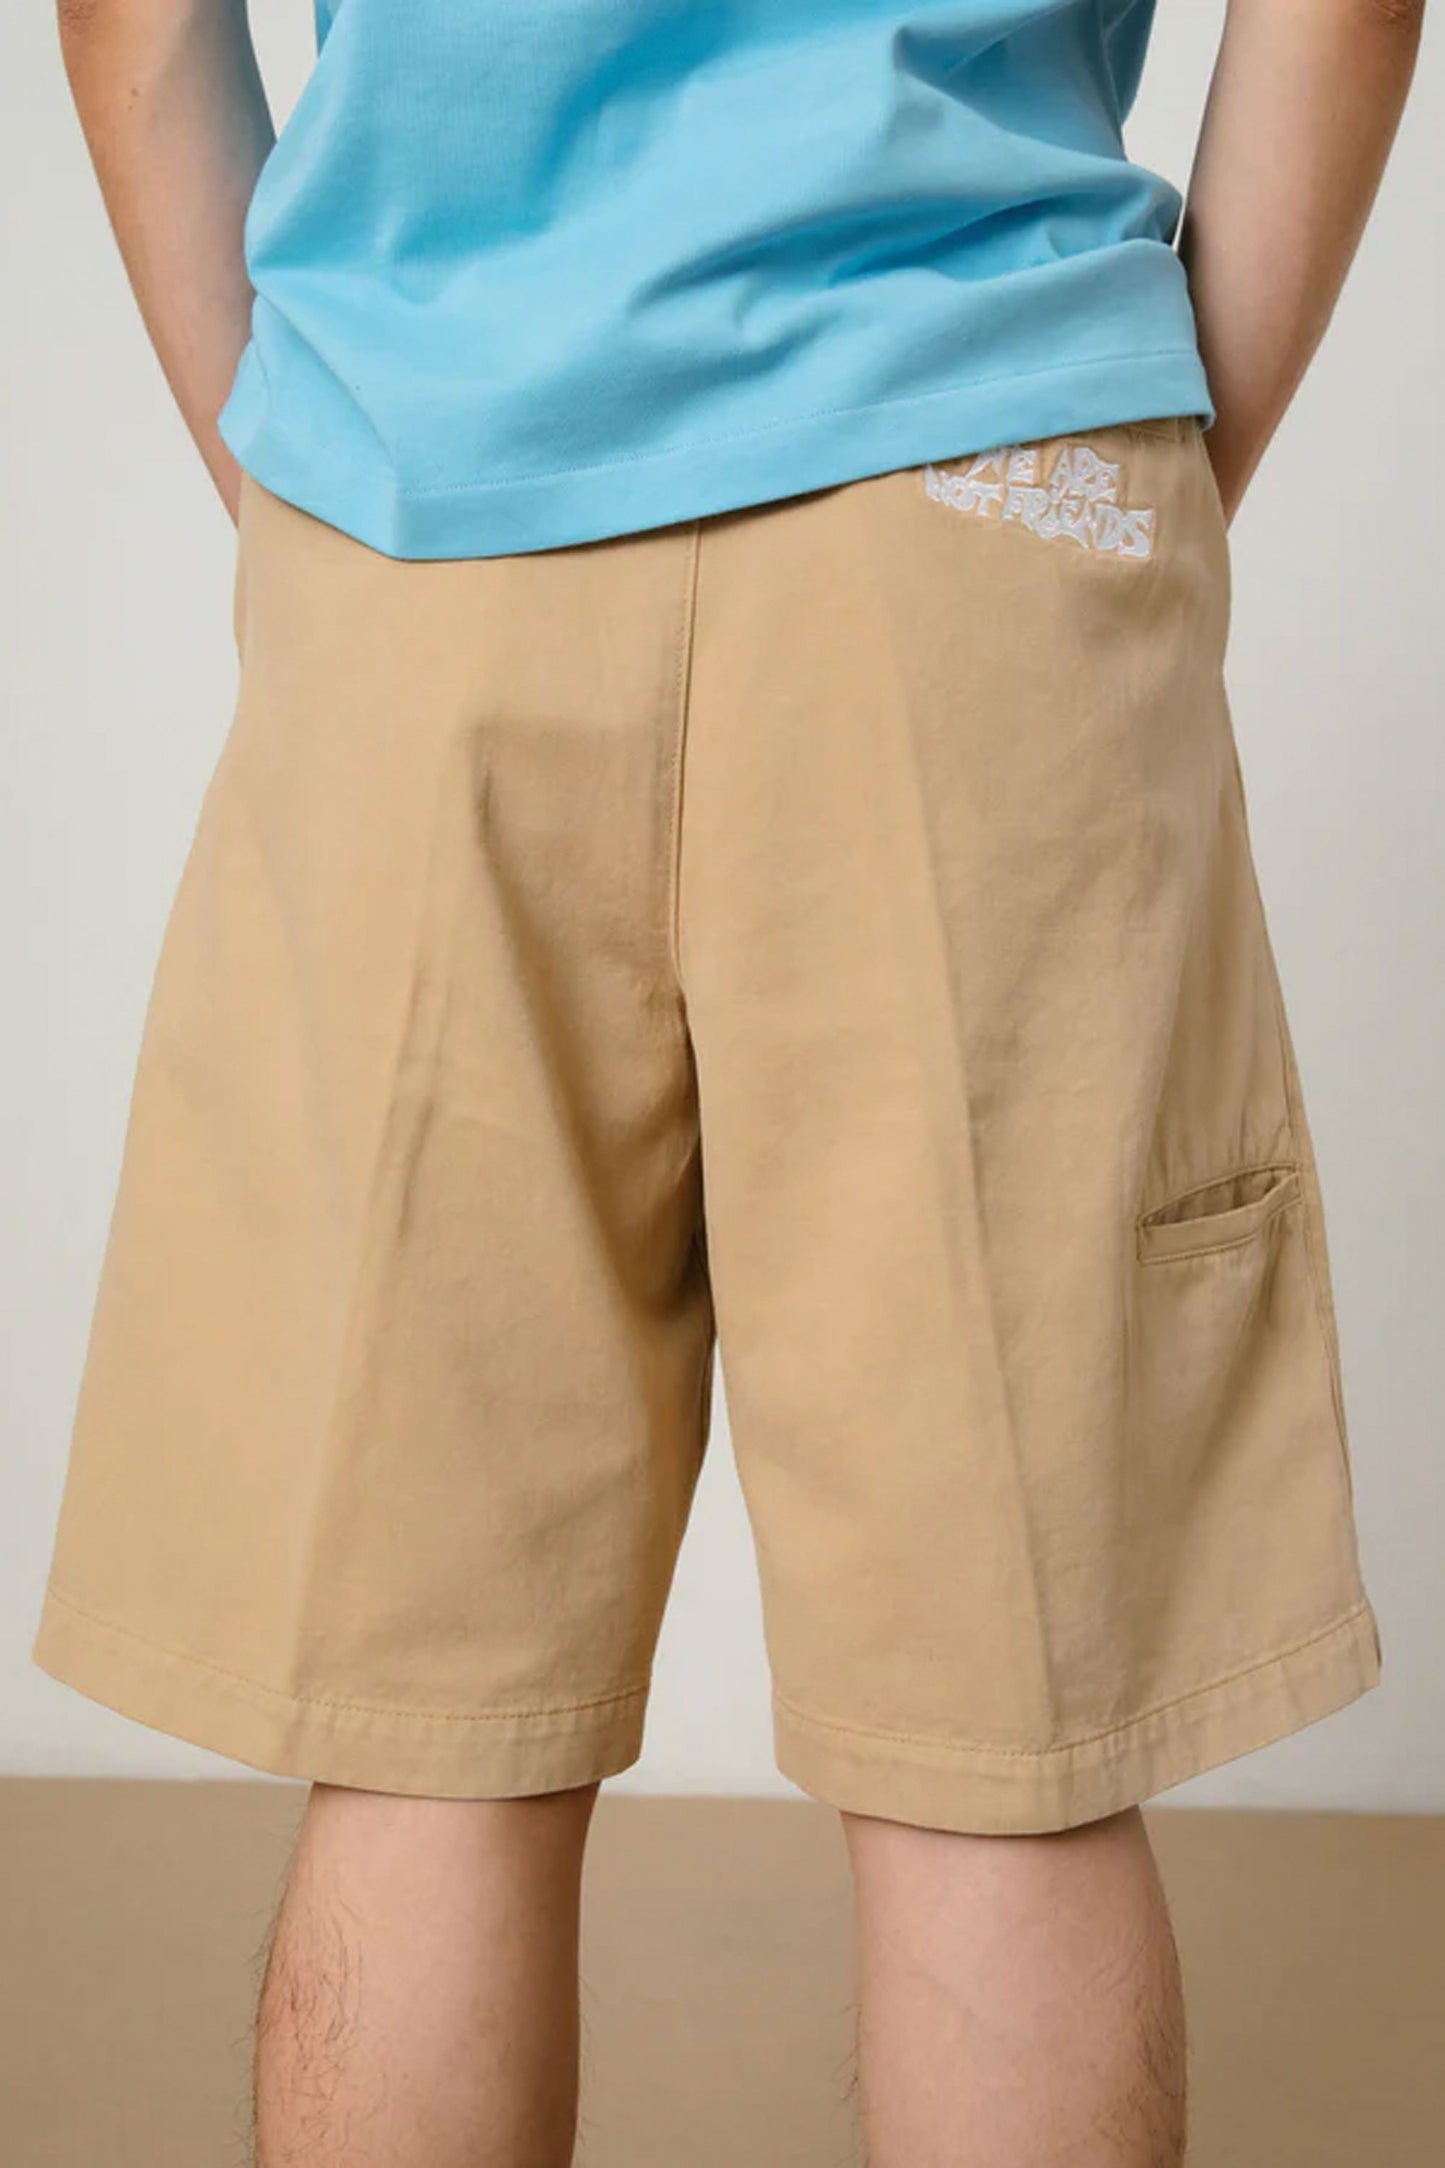 
                  
                    PUKAS-SURF-SHOP-SHORTS-MAN-WE-ARE-NOT-FRIENDS-CHINO-BEIGE
                  
                